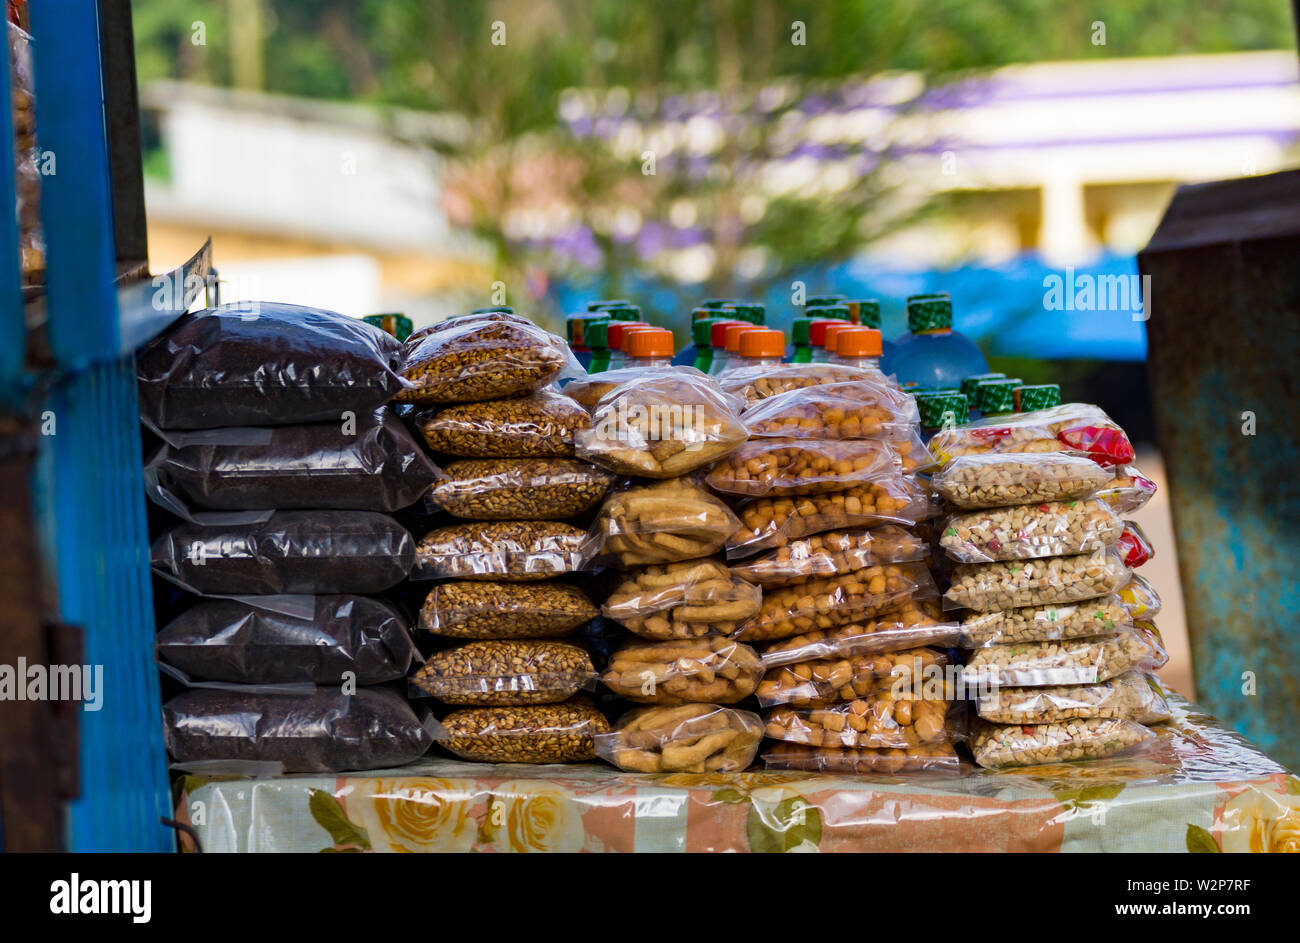 Nuts, grain and pulses on sale in a stall by the roadside in Bonga, Ethiopia Stock Photo